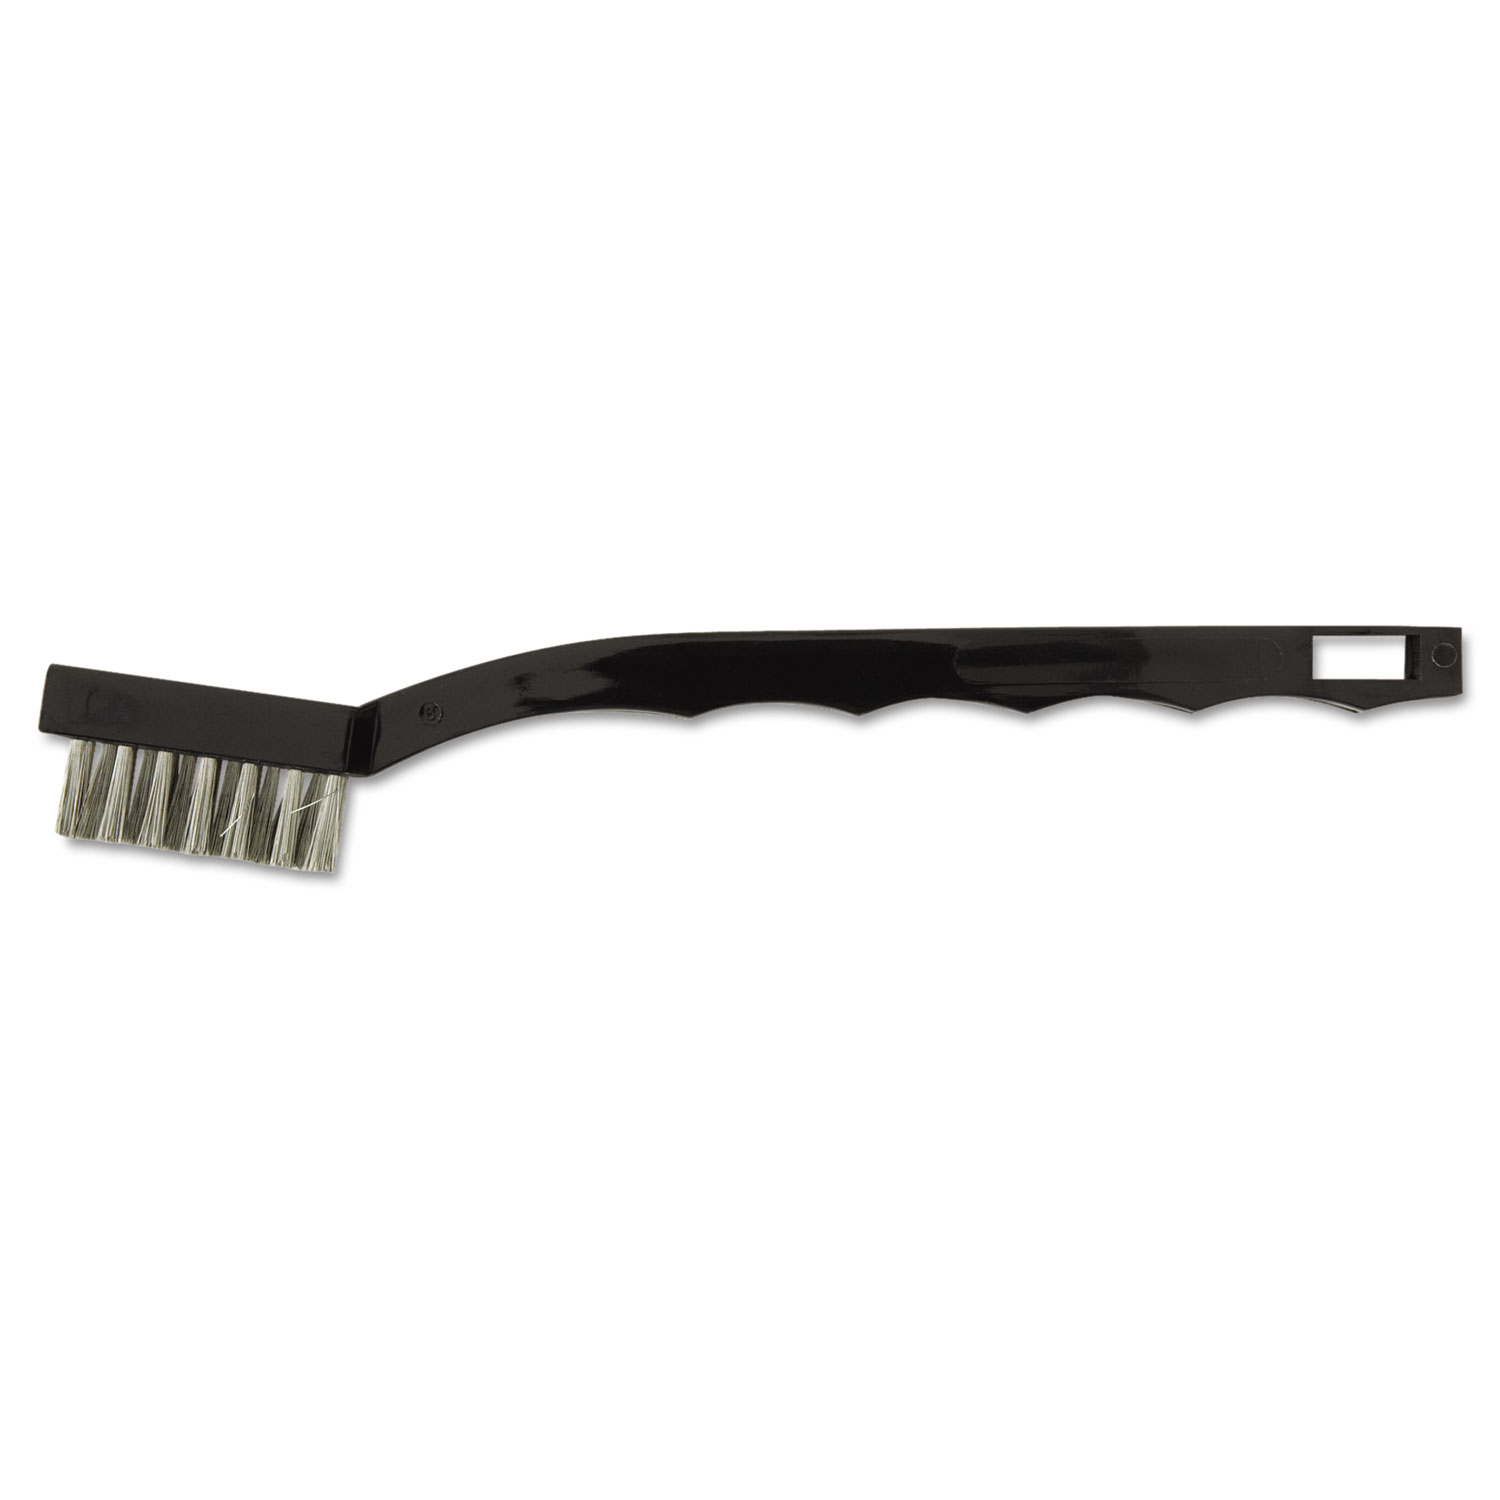  Anchor Brand 94939 Utility Brush, Stainless Steel Bristles, Plastic Handle (ANR37SS) 